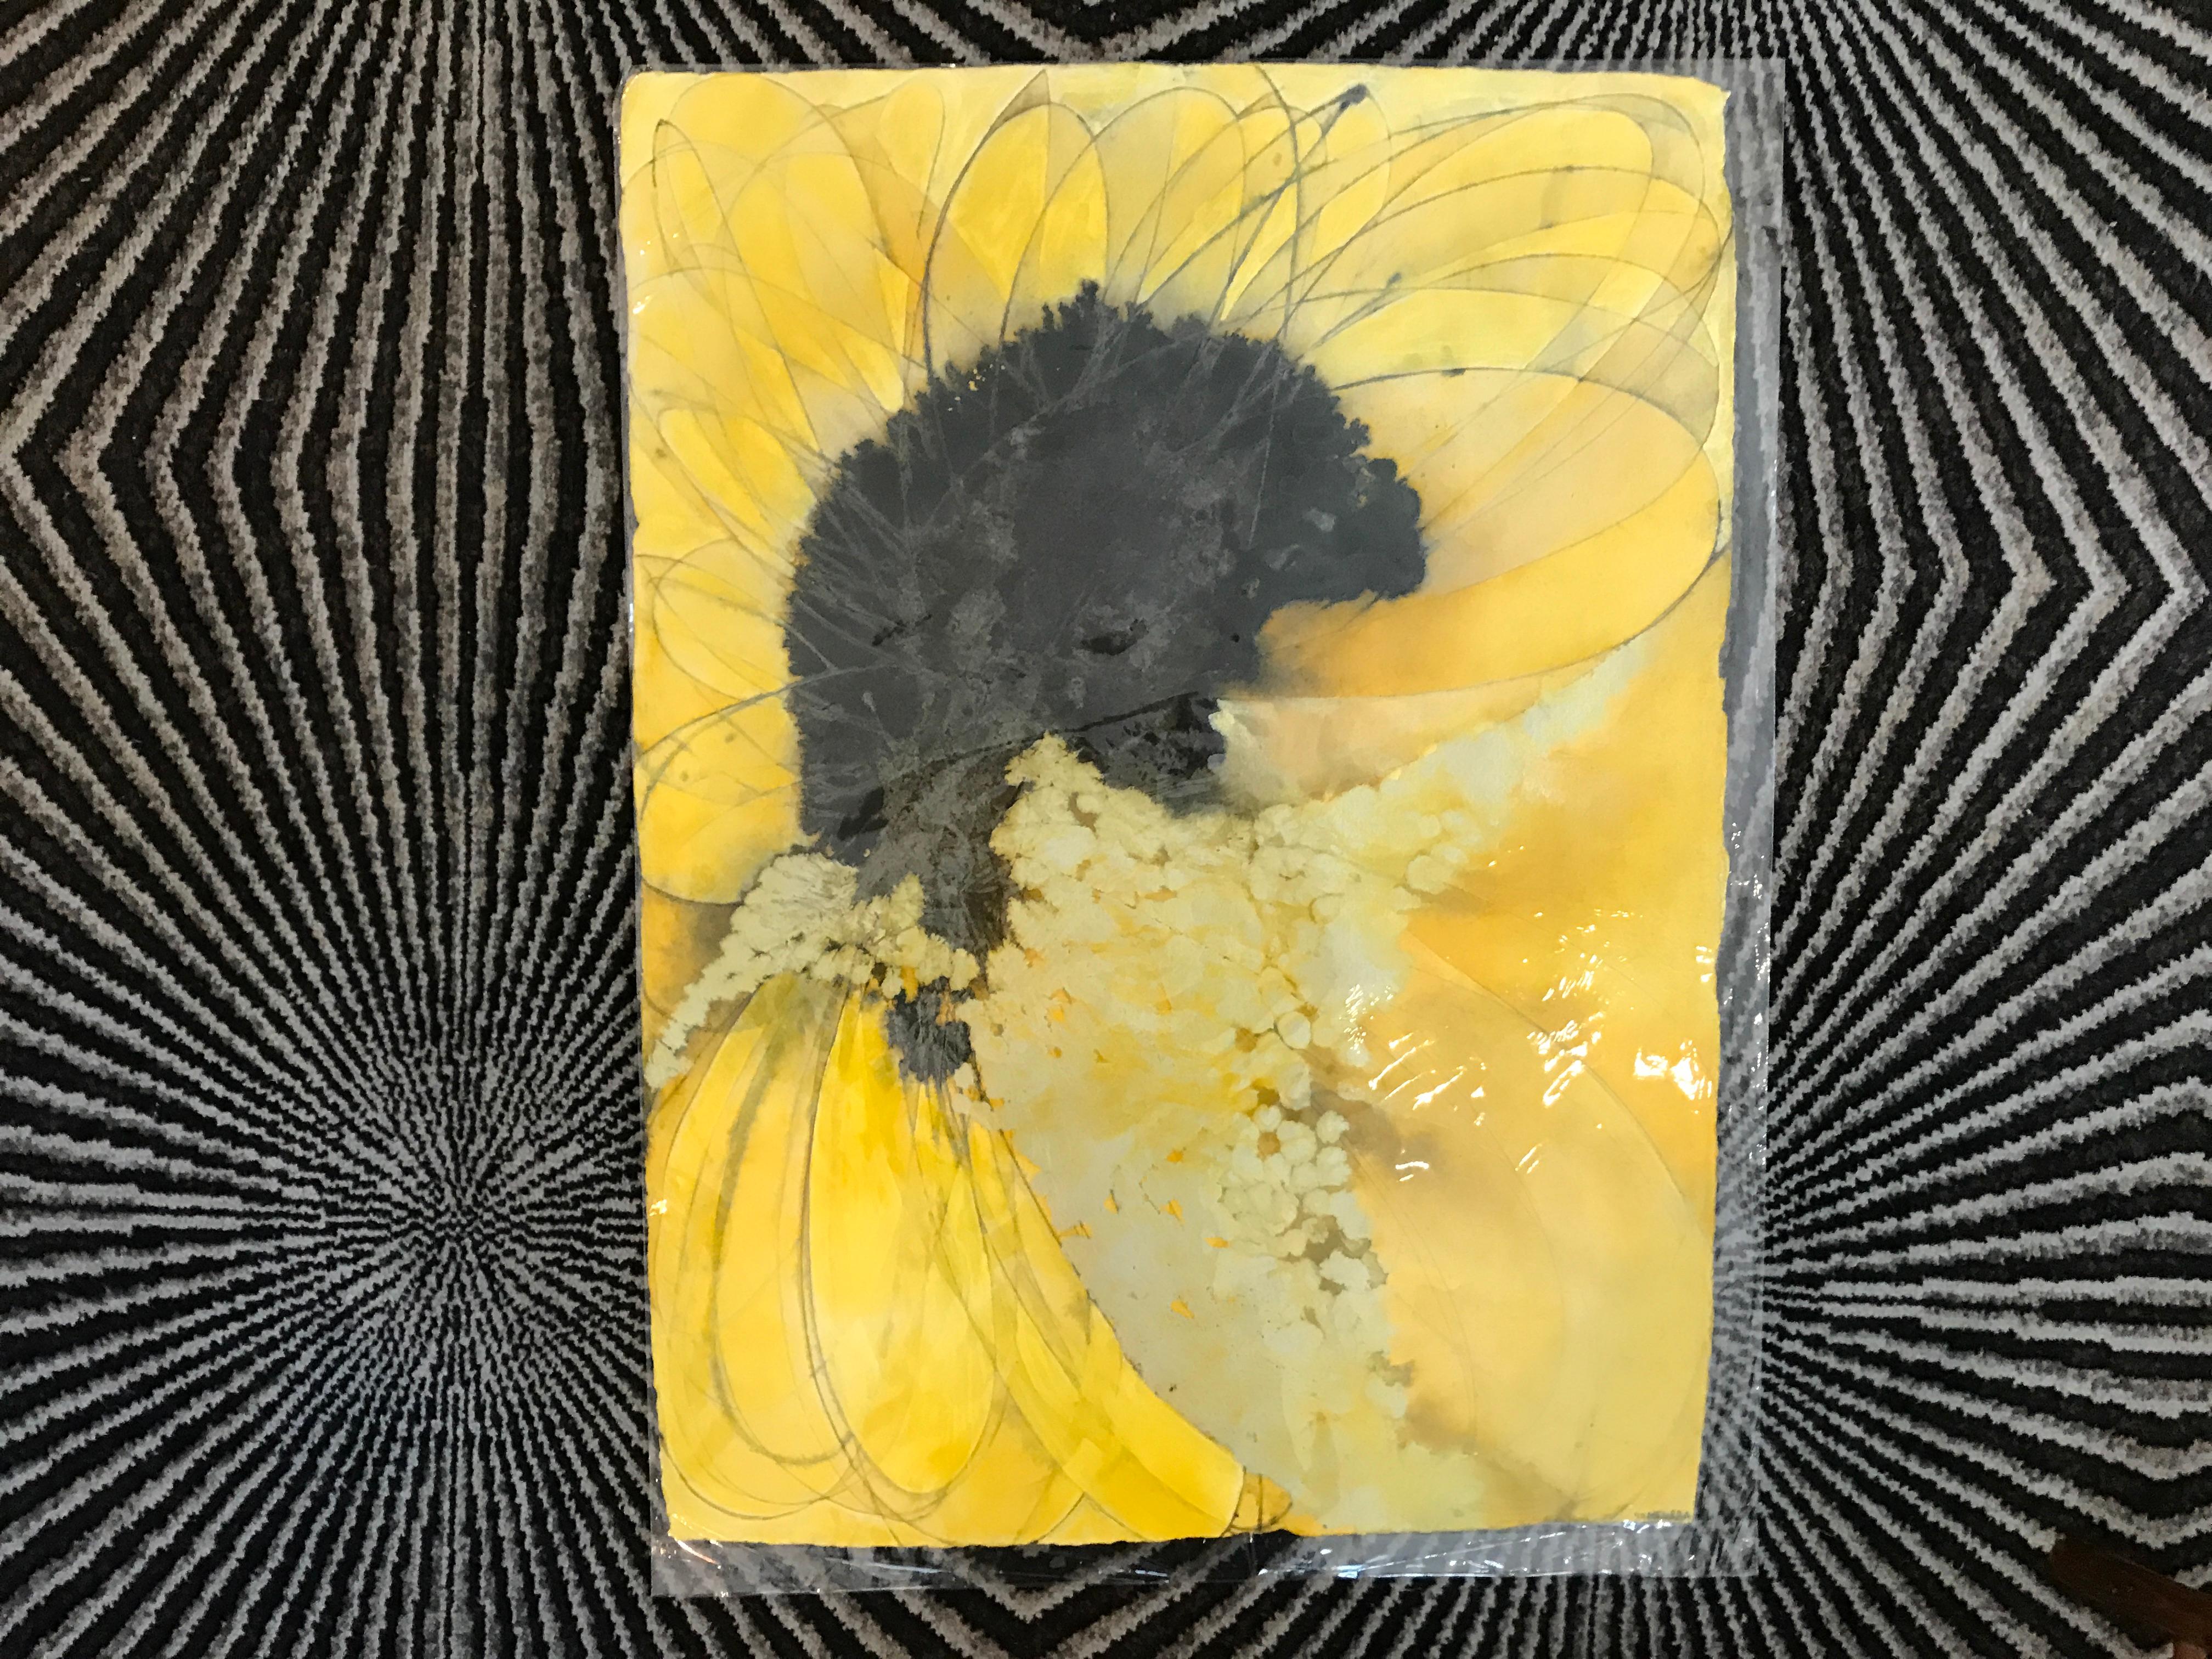 'Stand With Me III' is a medium size ink, acrylic and powdered graphite on handmade paper abstract piece created by American artist Mel Rea in 2018. Featuring a rich palette made of yellow, black and white, the painting is an abstracted depiction of